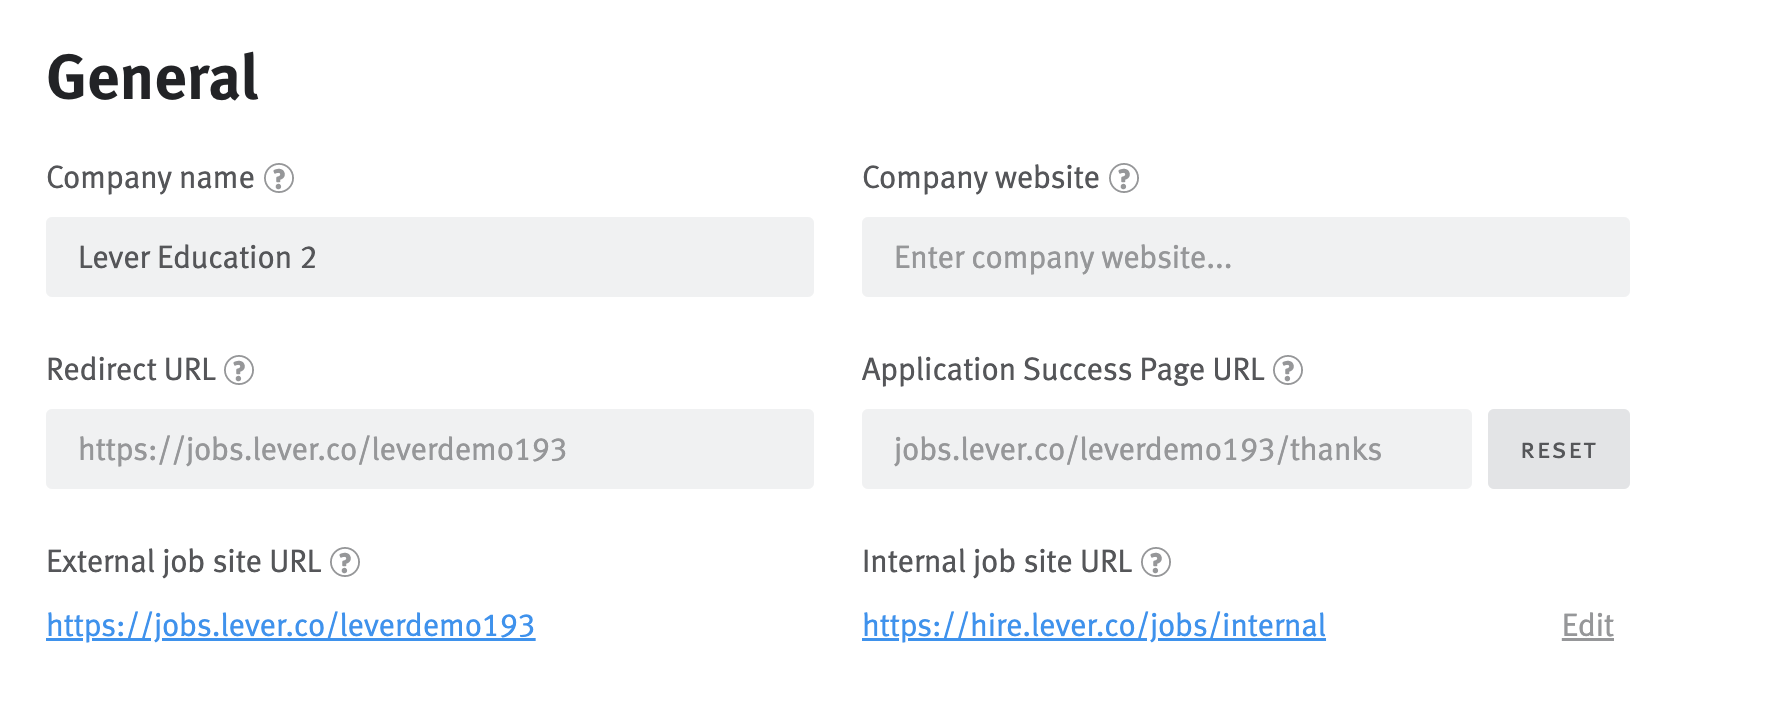 General job sites settings fields and URLs for external and internal job sites.